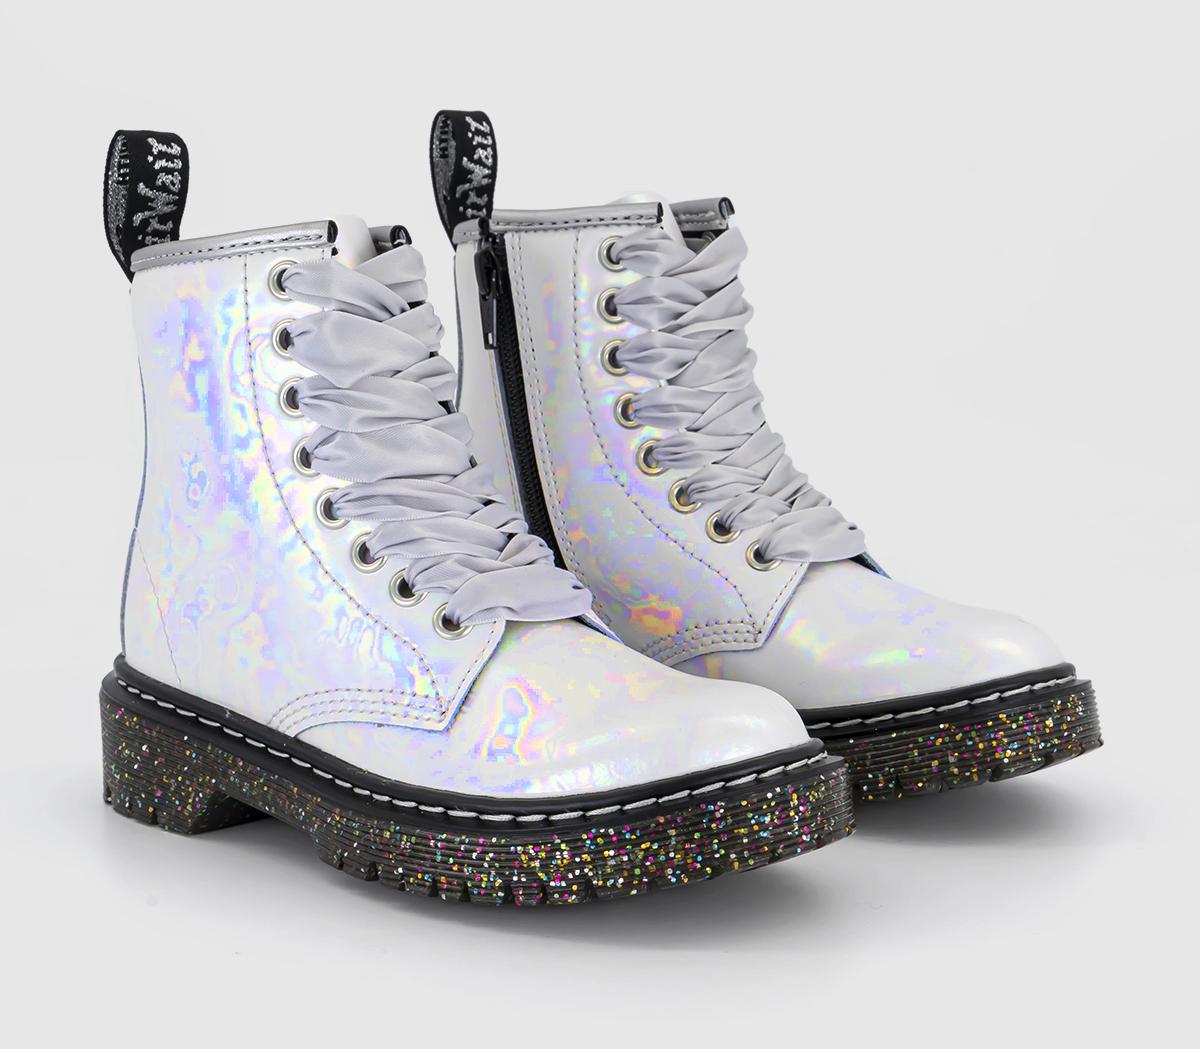 Dr. Martens 1460 Bex Junior Boots White Opalescent Shimmer, 10 Youth